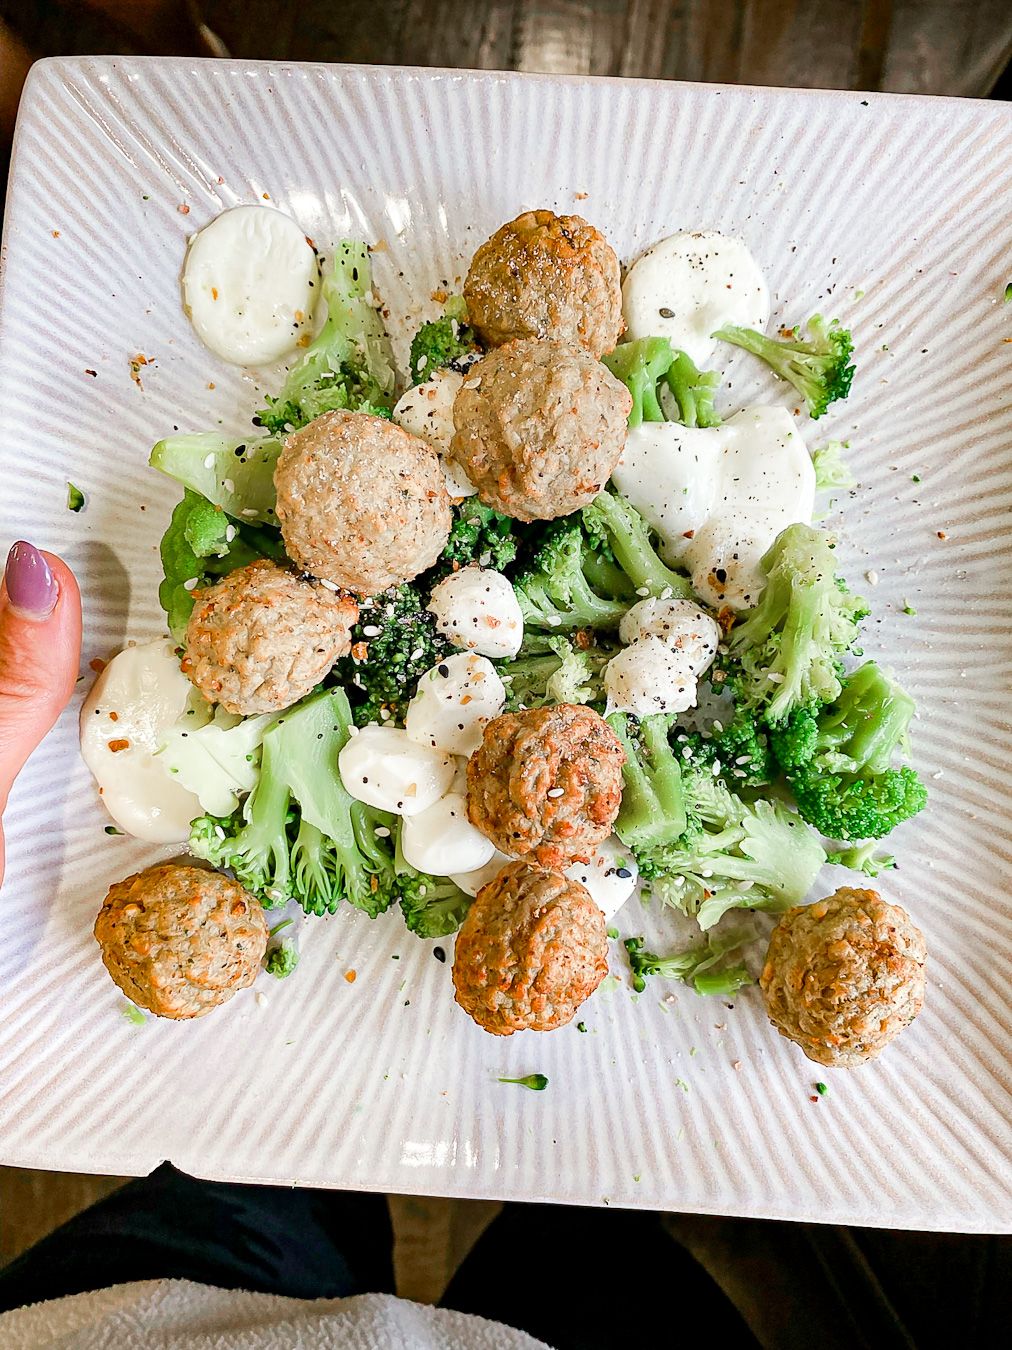 Back To School Dinners: Easy Meatball Kabobs Your Kids Will Actually Love by Alabama family + healthy living blogger, Heather Brown // My Life Well Loved